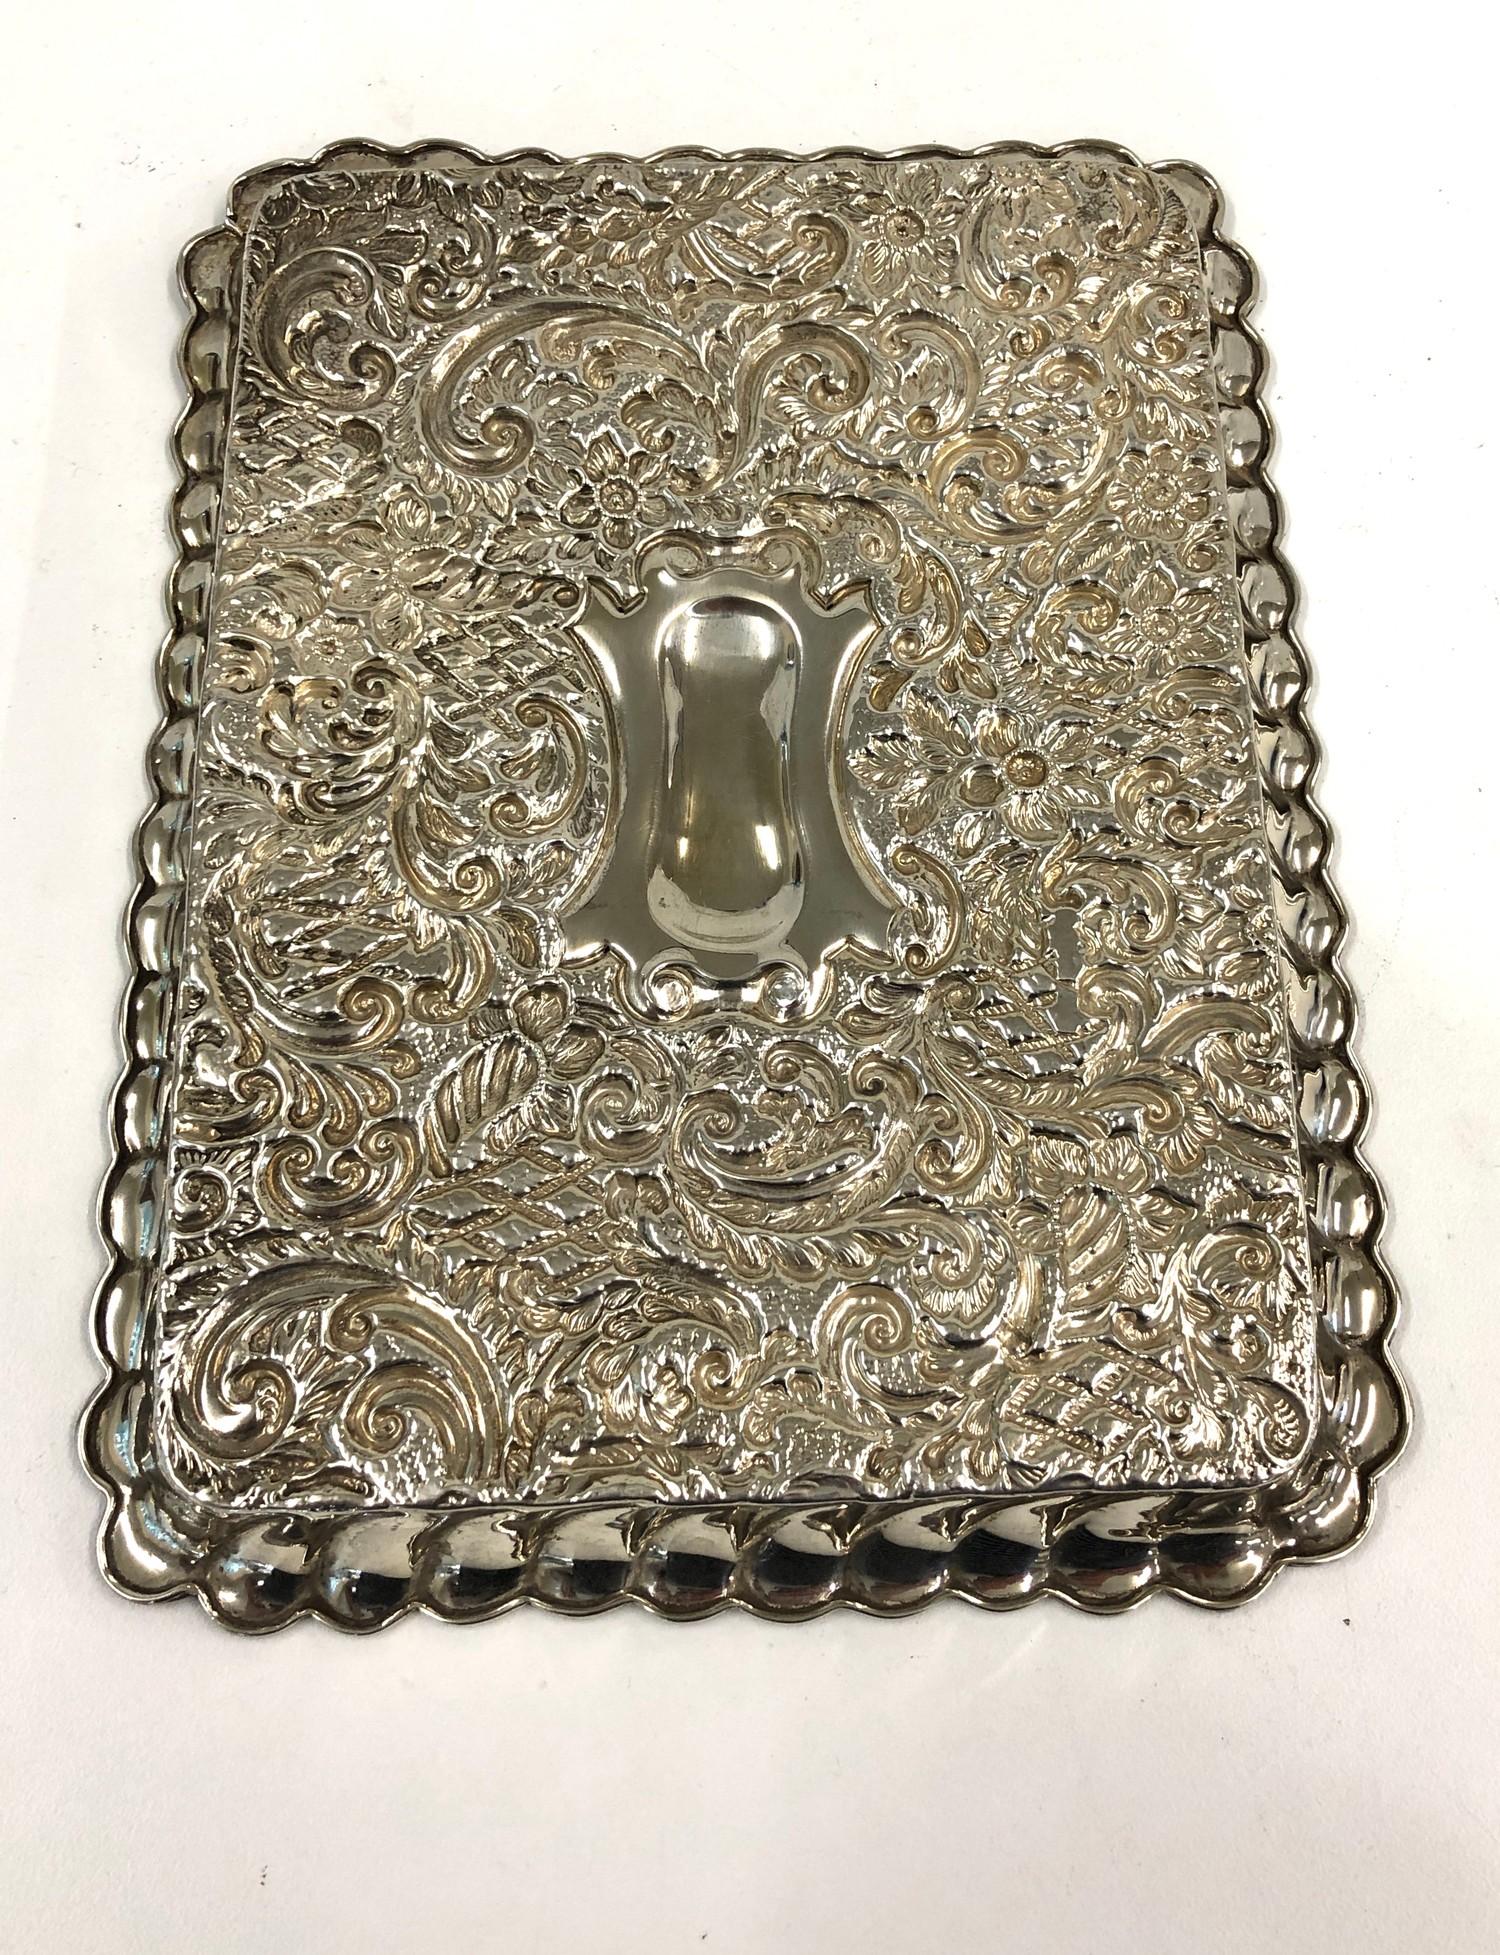 Antique silver embossed bedroom tray, Birmingham silver hallmarks weight approx 215g - Image 2 of 3